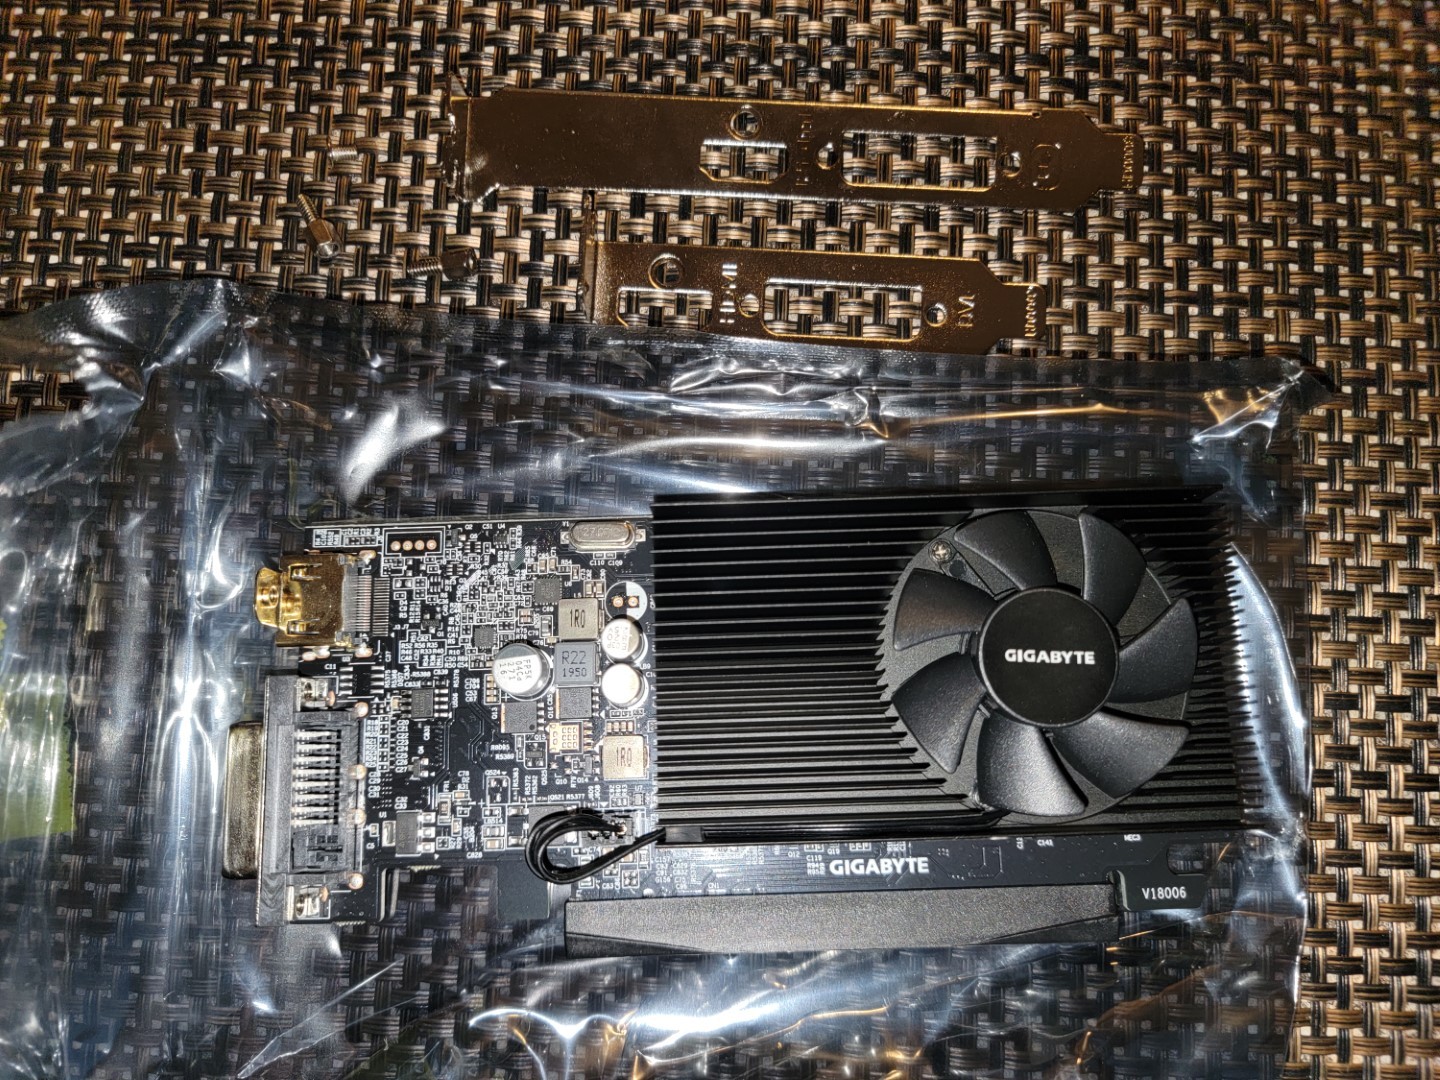 Gigabyte GV-N1030D4-2GL Nvidia Geforce GT 1030 Low Profile D4 2G DDR4 2GB Graphics Card - GPU with bracket removed.